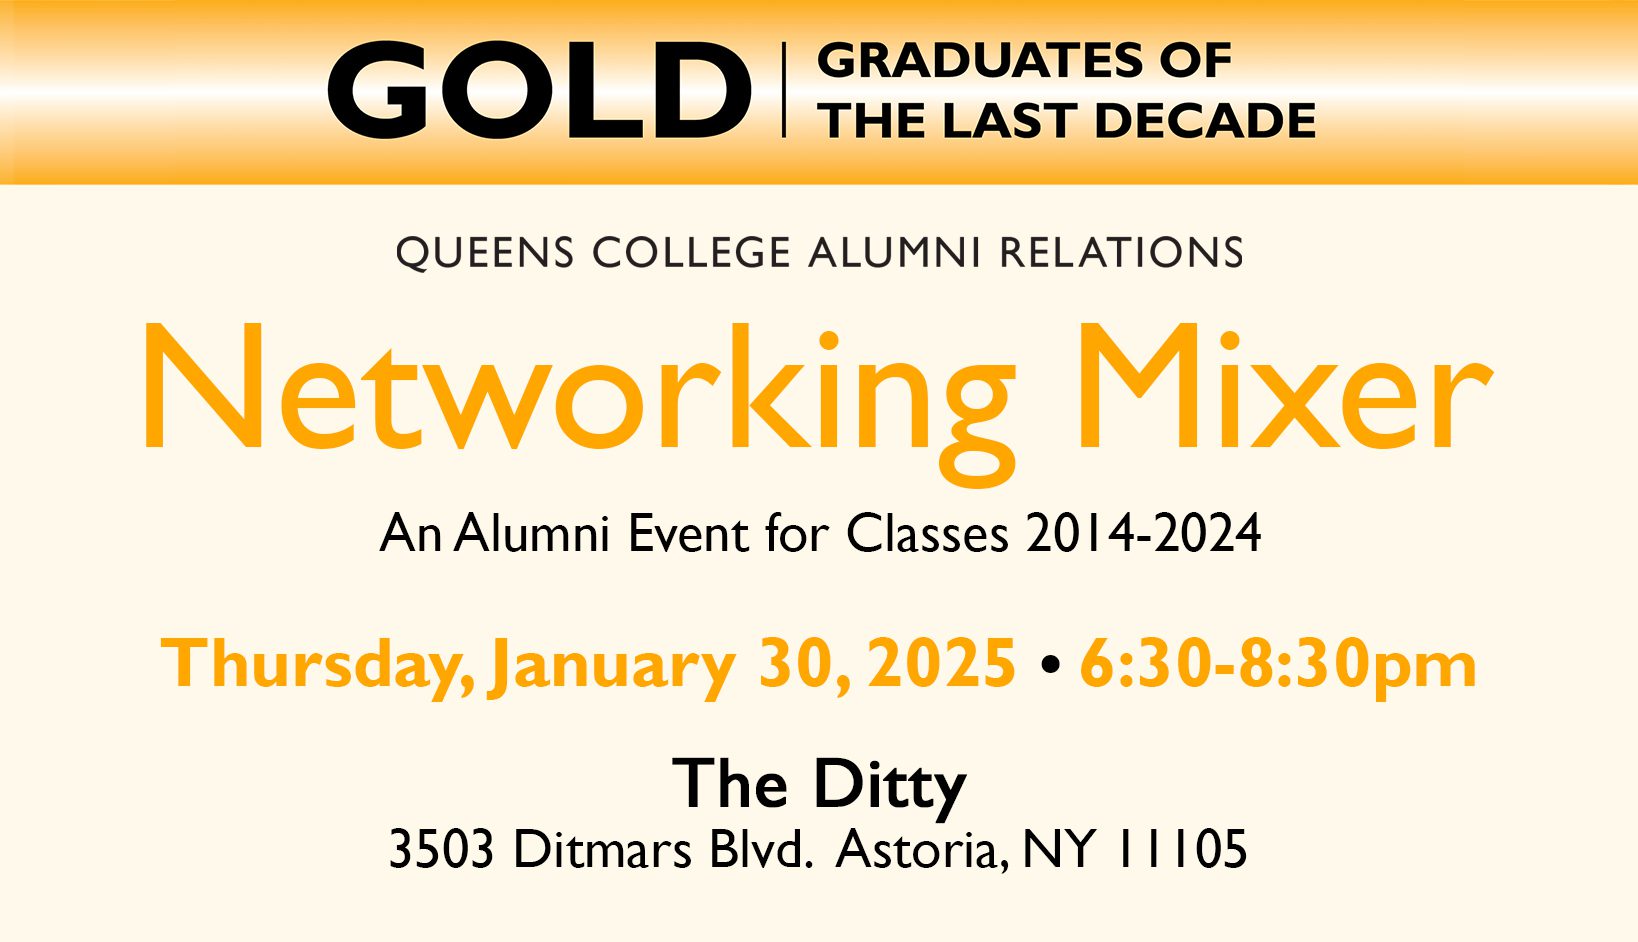 GOLD Networking Mixer Save the Date 1-23-25